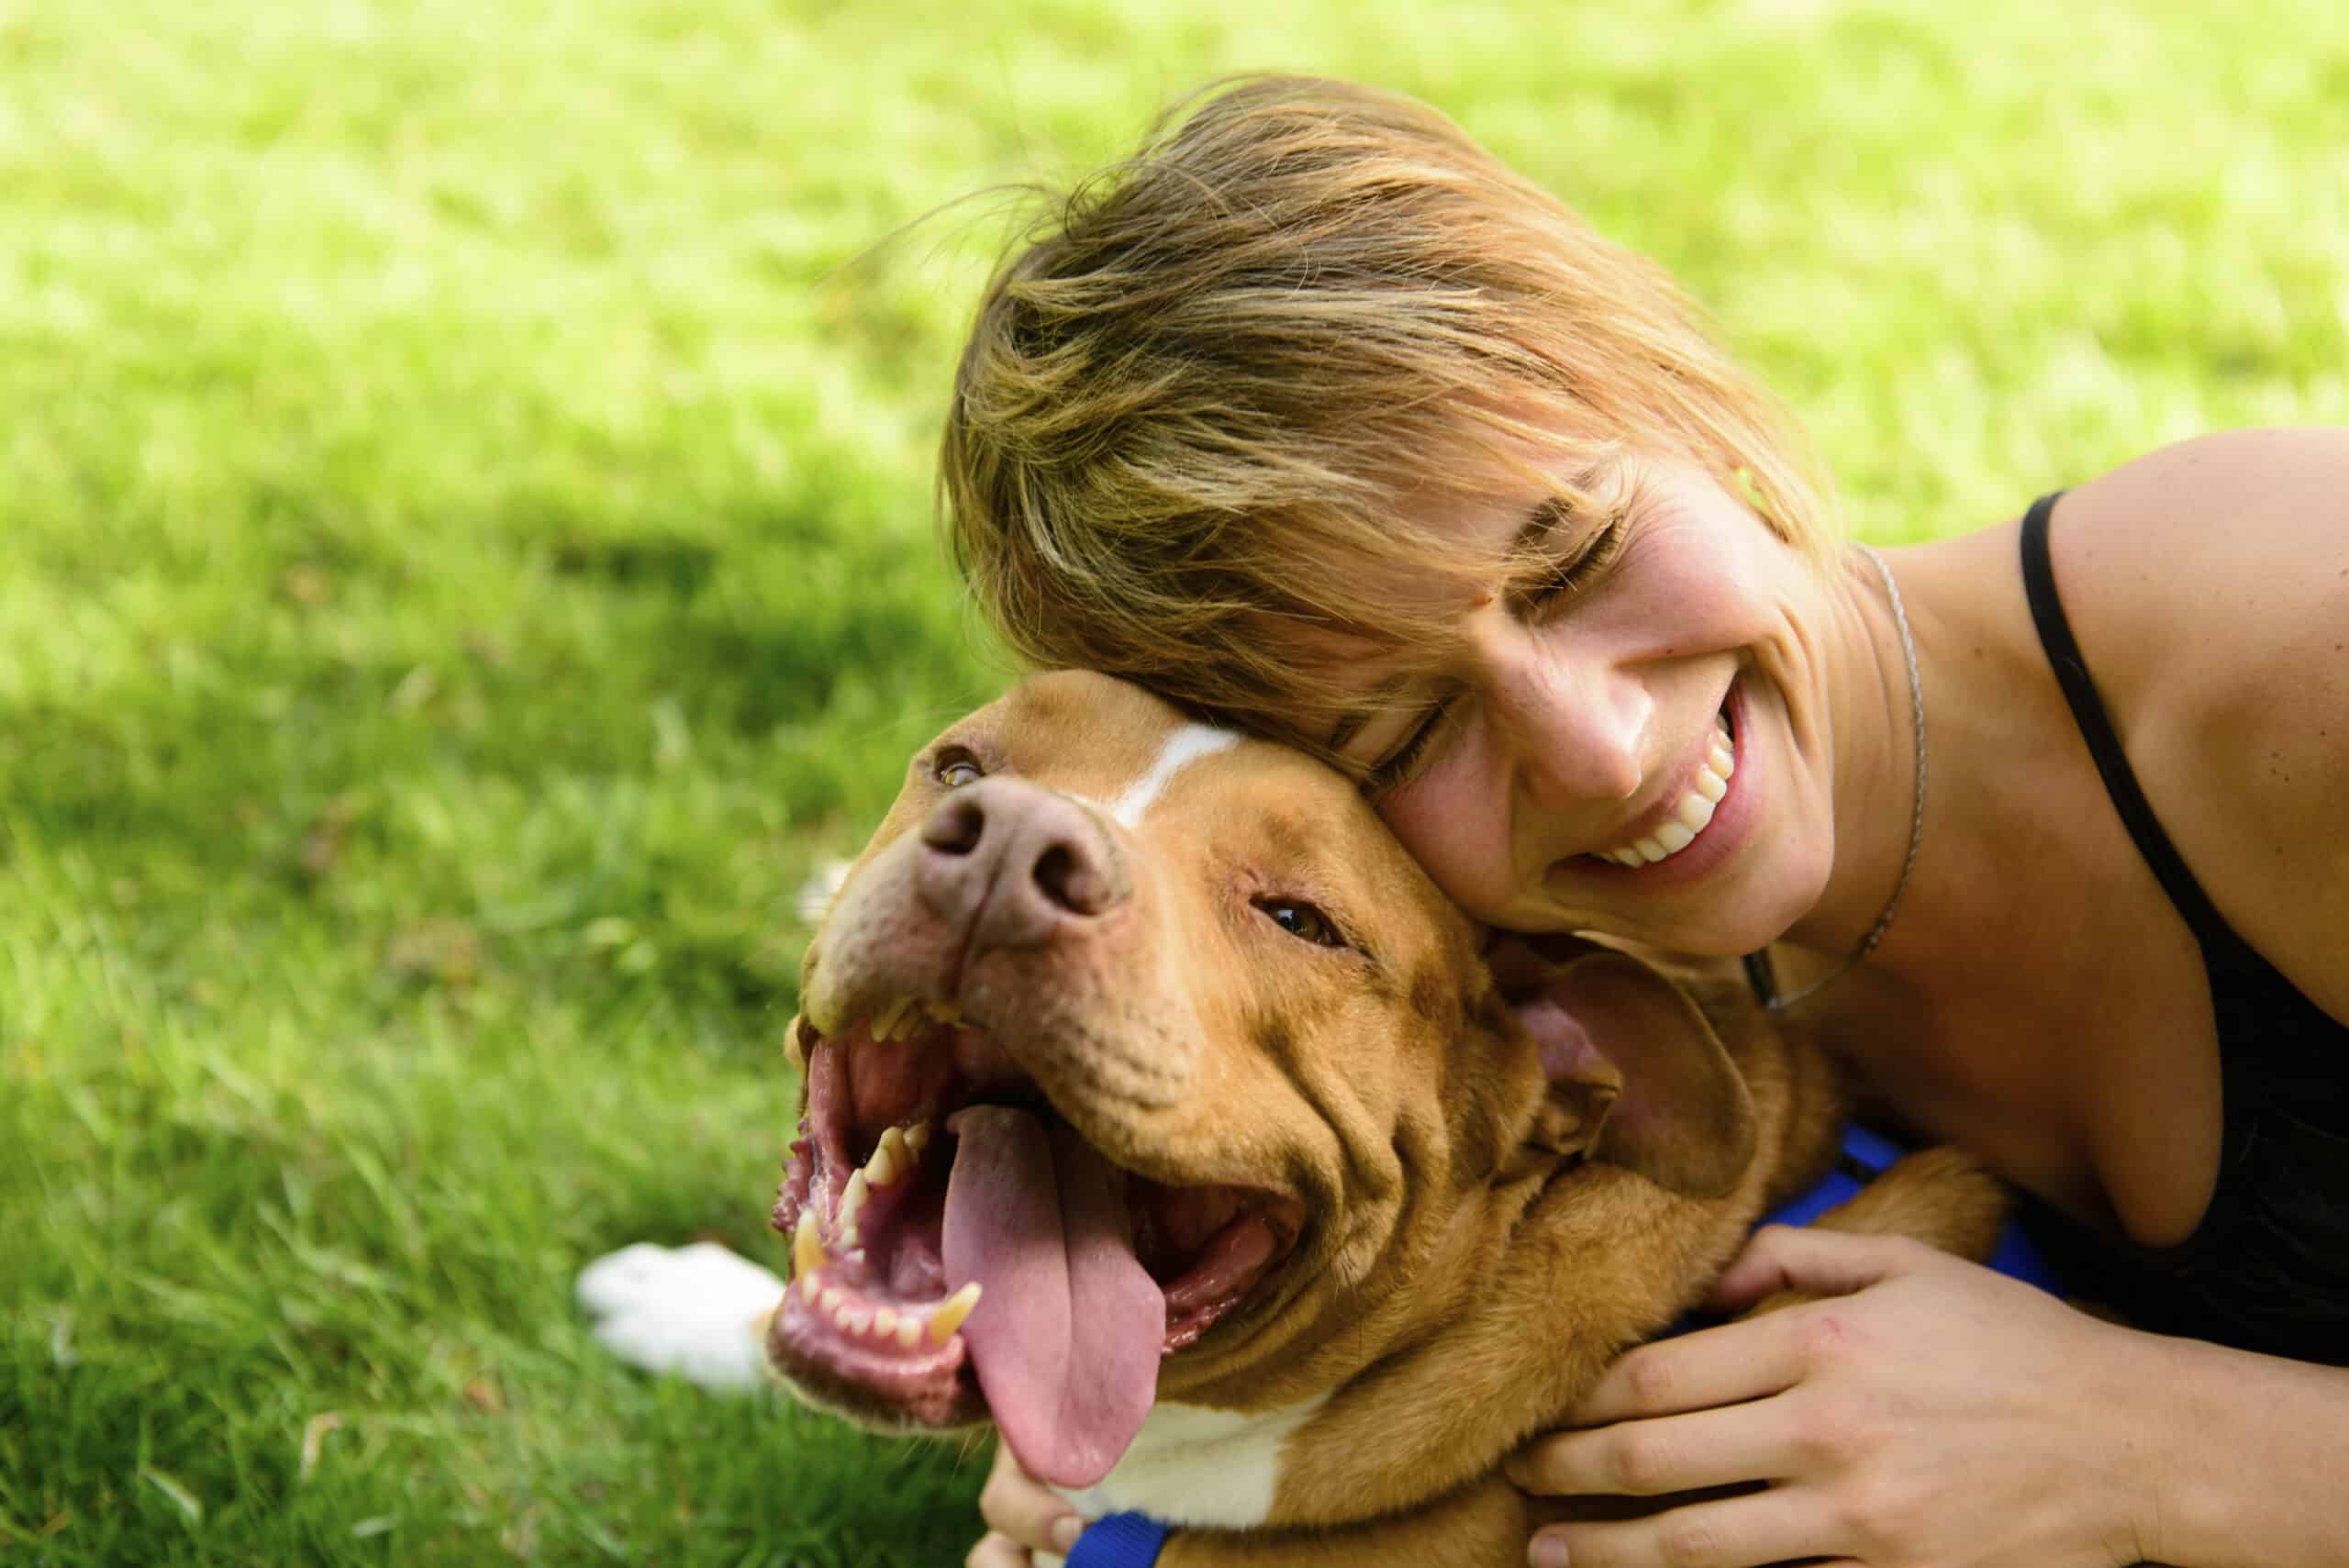 Pets and Their People: Exploring the Human-Animal Bond